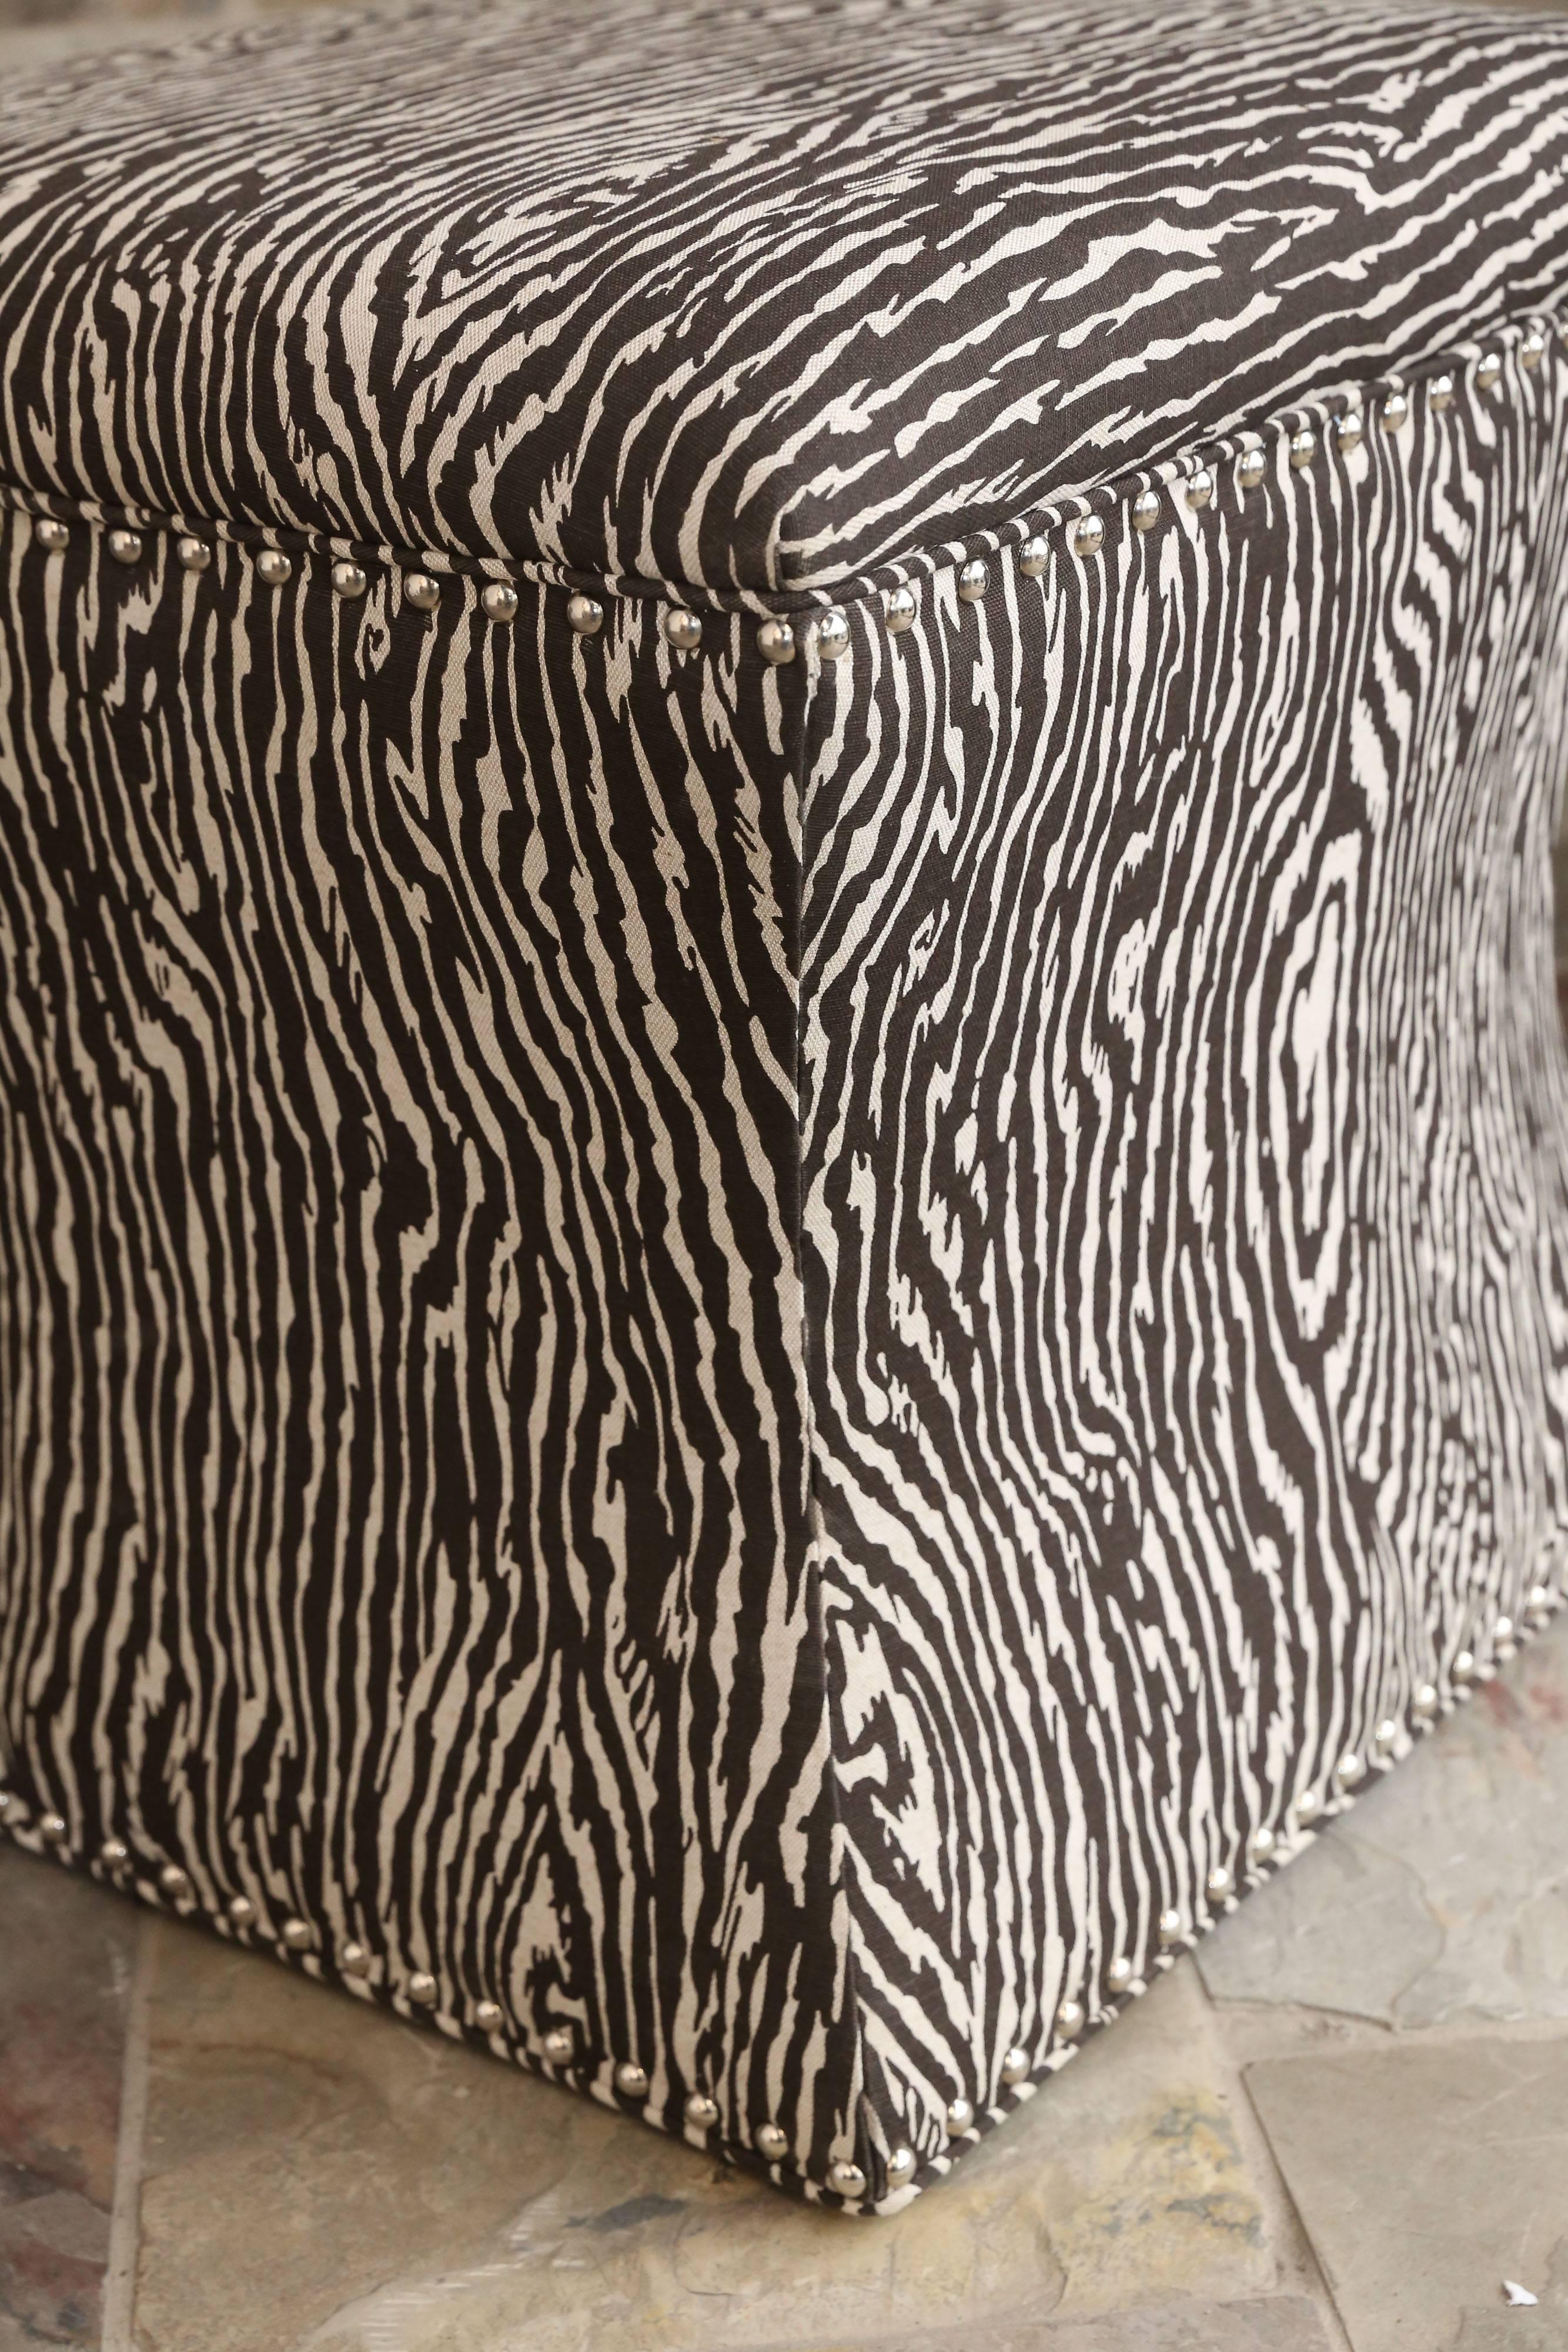 Lovely custom-made chocolate brown and cream ottomans in a wood print fabric finished with silver studs. Each ottoman gracefully curves in than out.